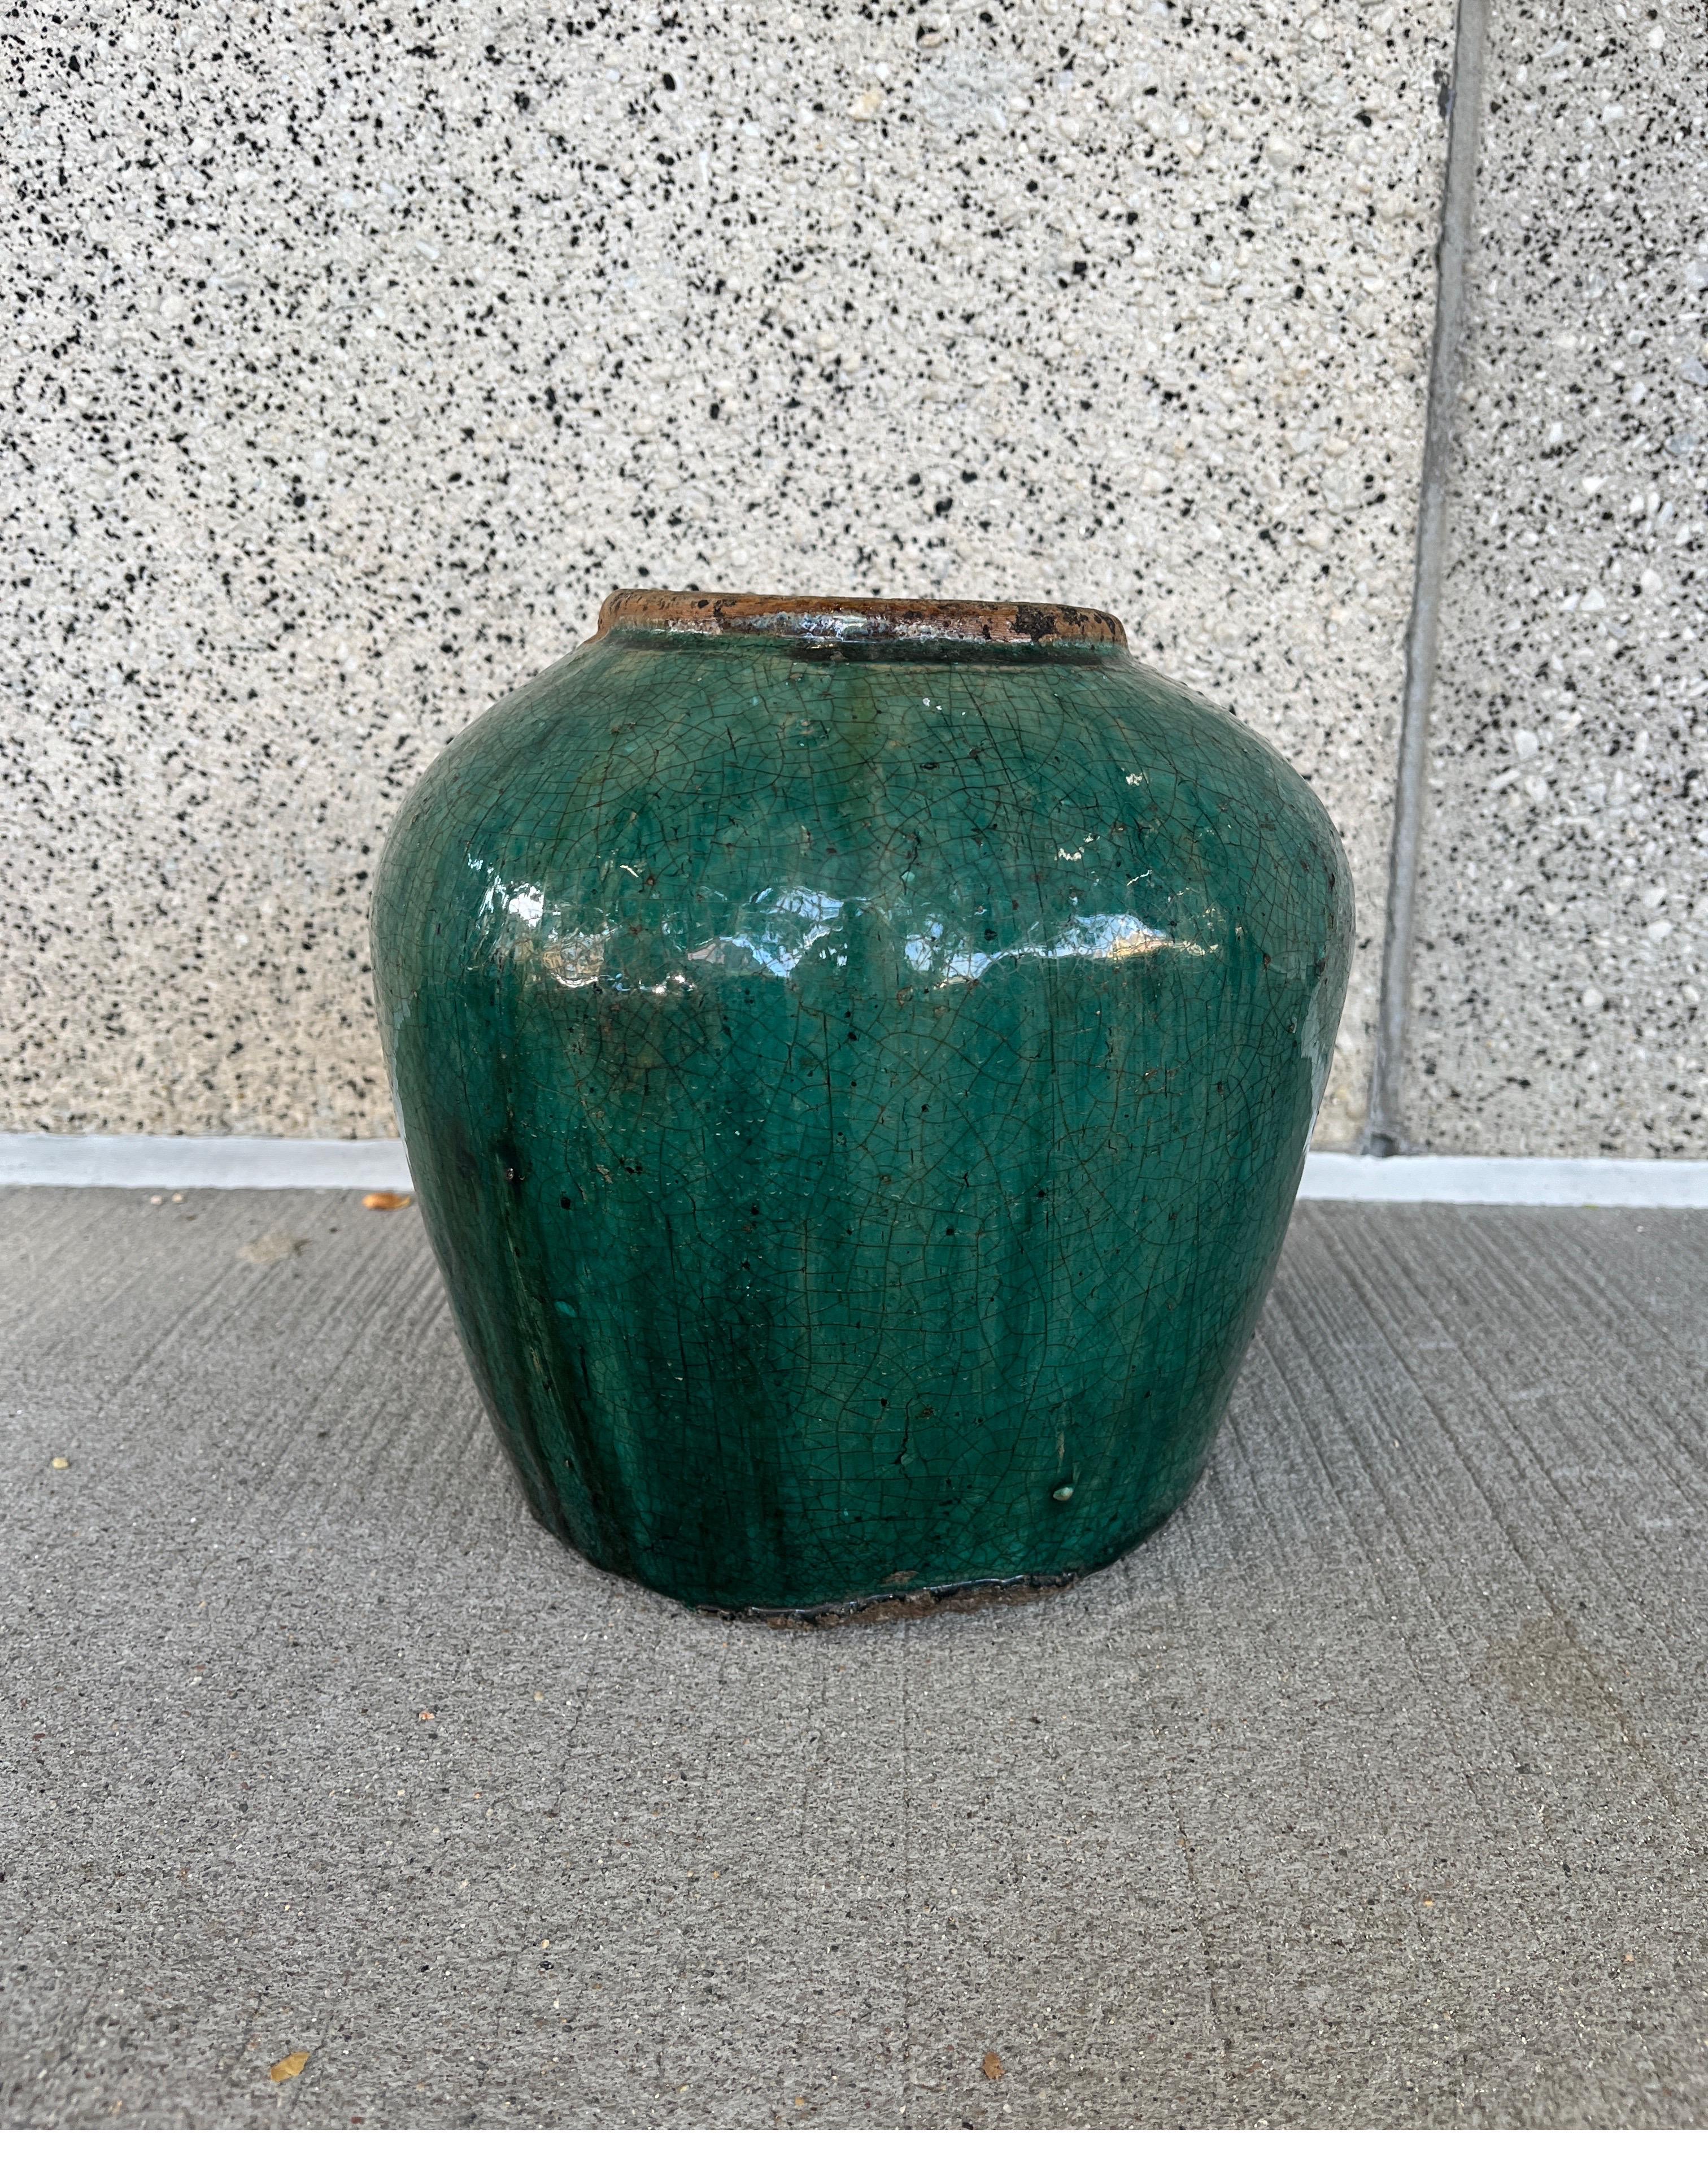 Originally used to store pickled ginger, this large and heavy jar has a classic shape and great presence. Collected in Hunan Province, this beautiful 19th Century piece communicates history and the rich stories that come from many decades of use. A